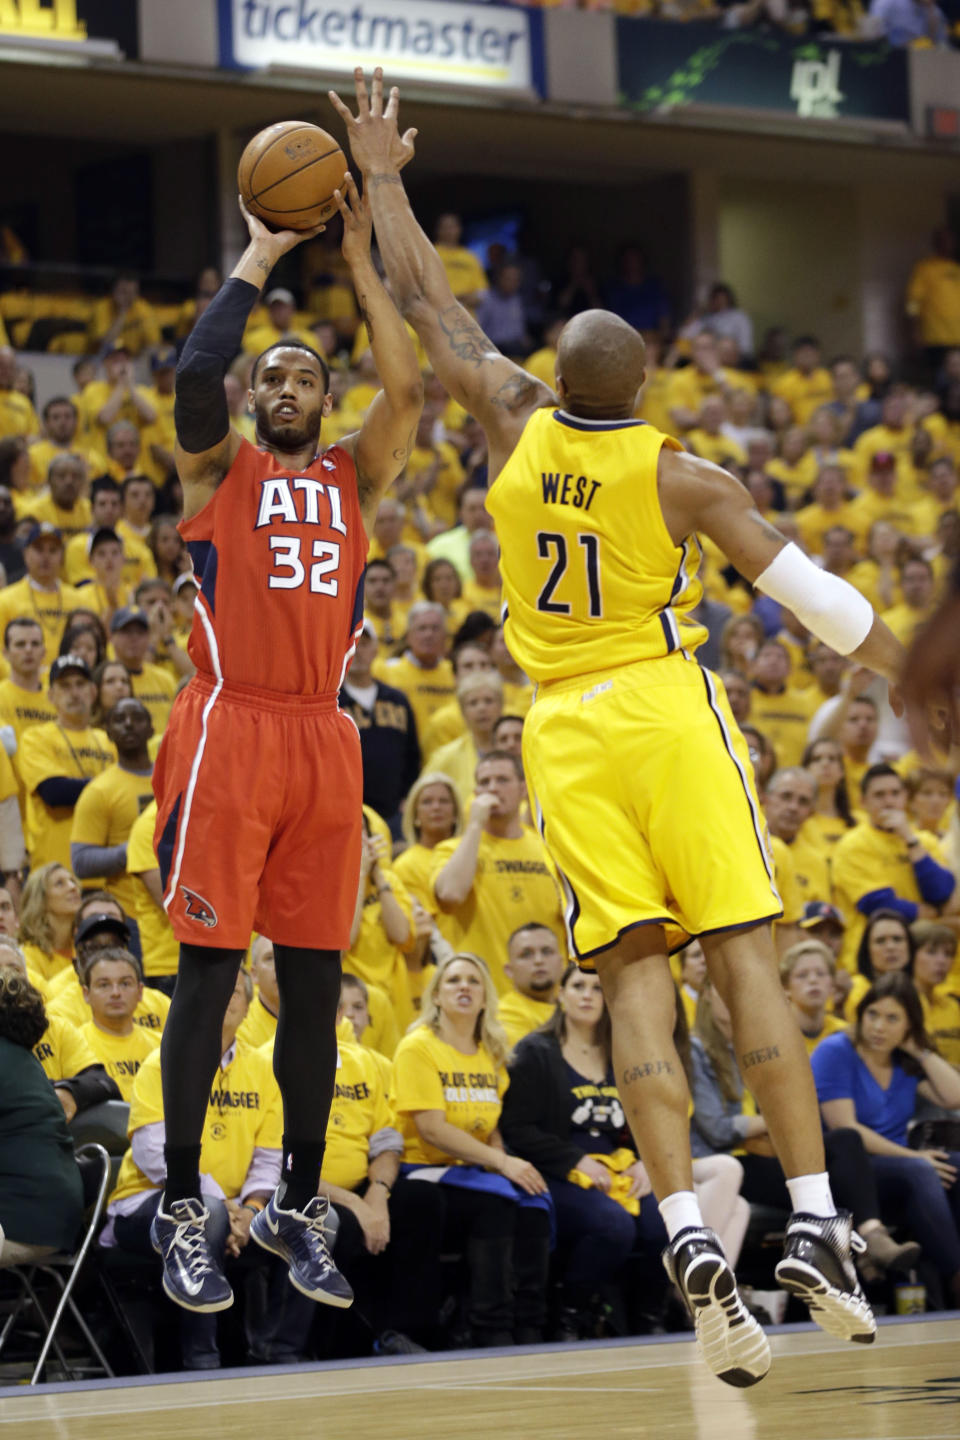 Atlanta Hawks forward Mike Scott (32) shoots over Indiana Pacers forward David West (21) during the first half of Game 7 of a first-round NBA basketball playoff series in Indianapolis, Saturday, May 3, 2014. (AP Photo/AJ Mast)